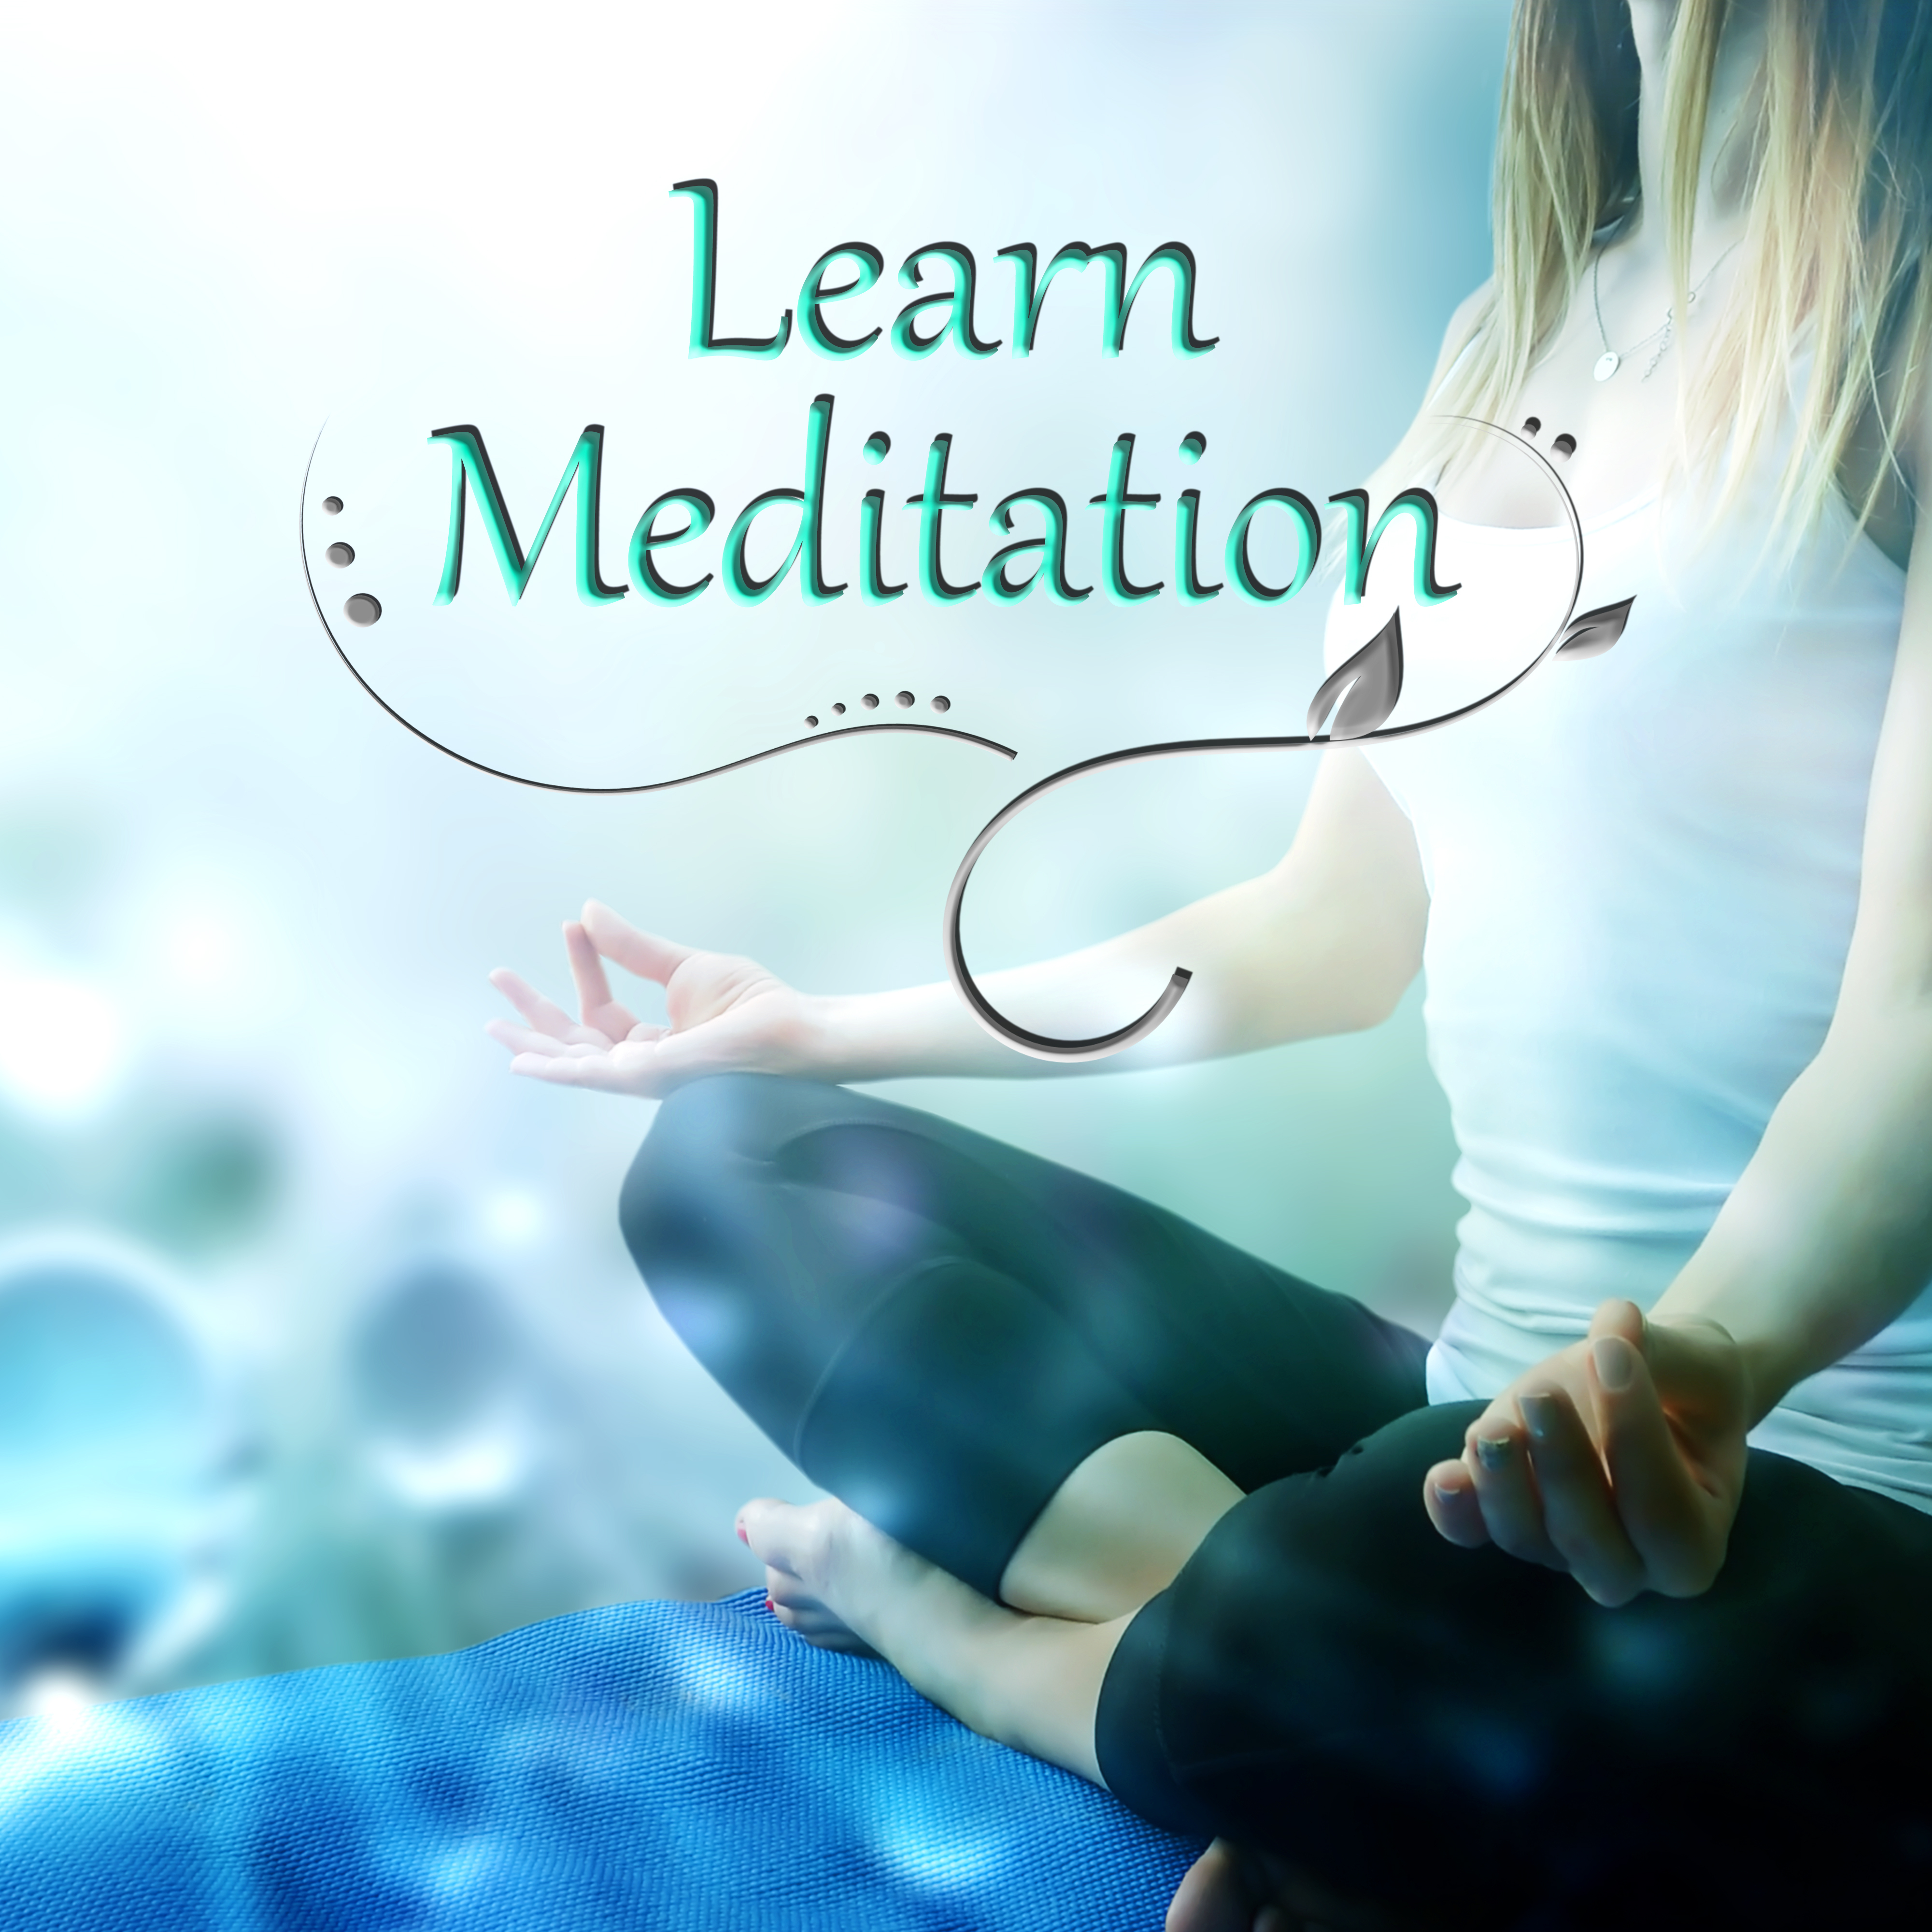 Learn Meditation - Calm Music for Meditation Beginners, Breathing Techniques, Natural Sounds for Yoga Classes with Stress Relief & Inner Peace